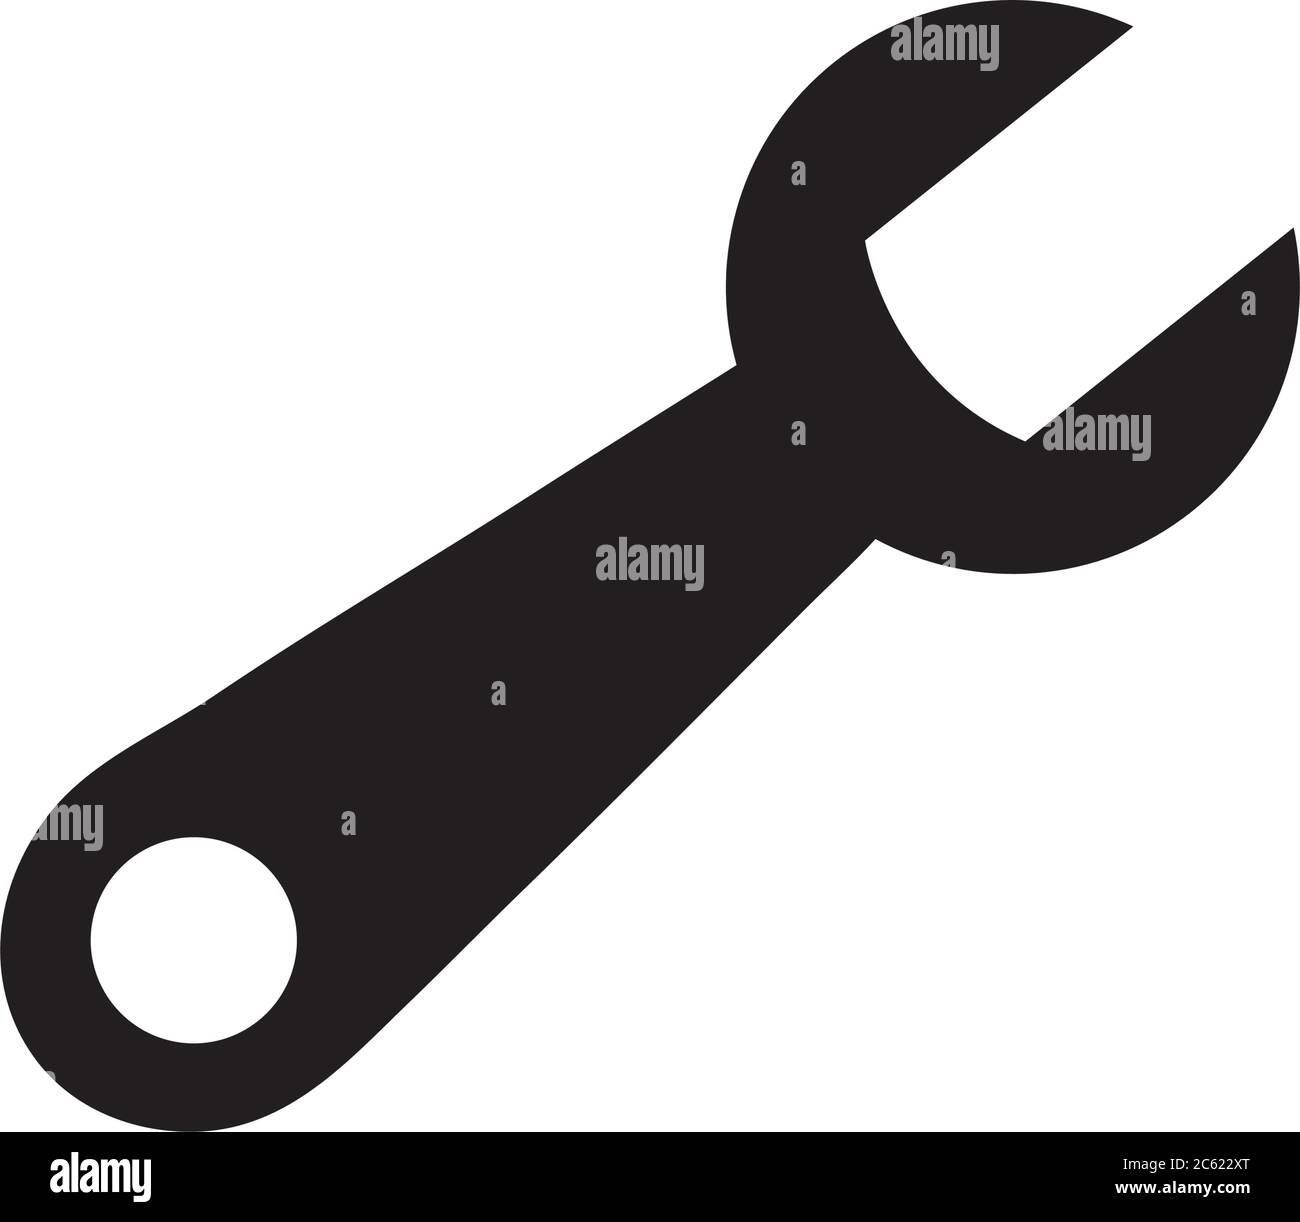 wrench tool icon over white background, silhouette style, vector illustration Stock Vector